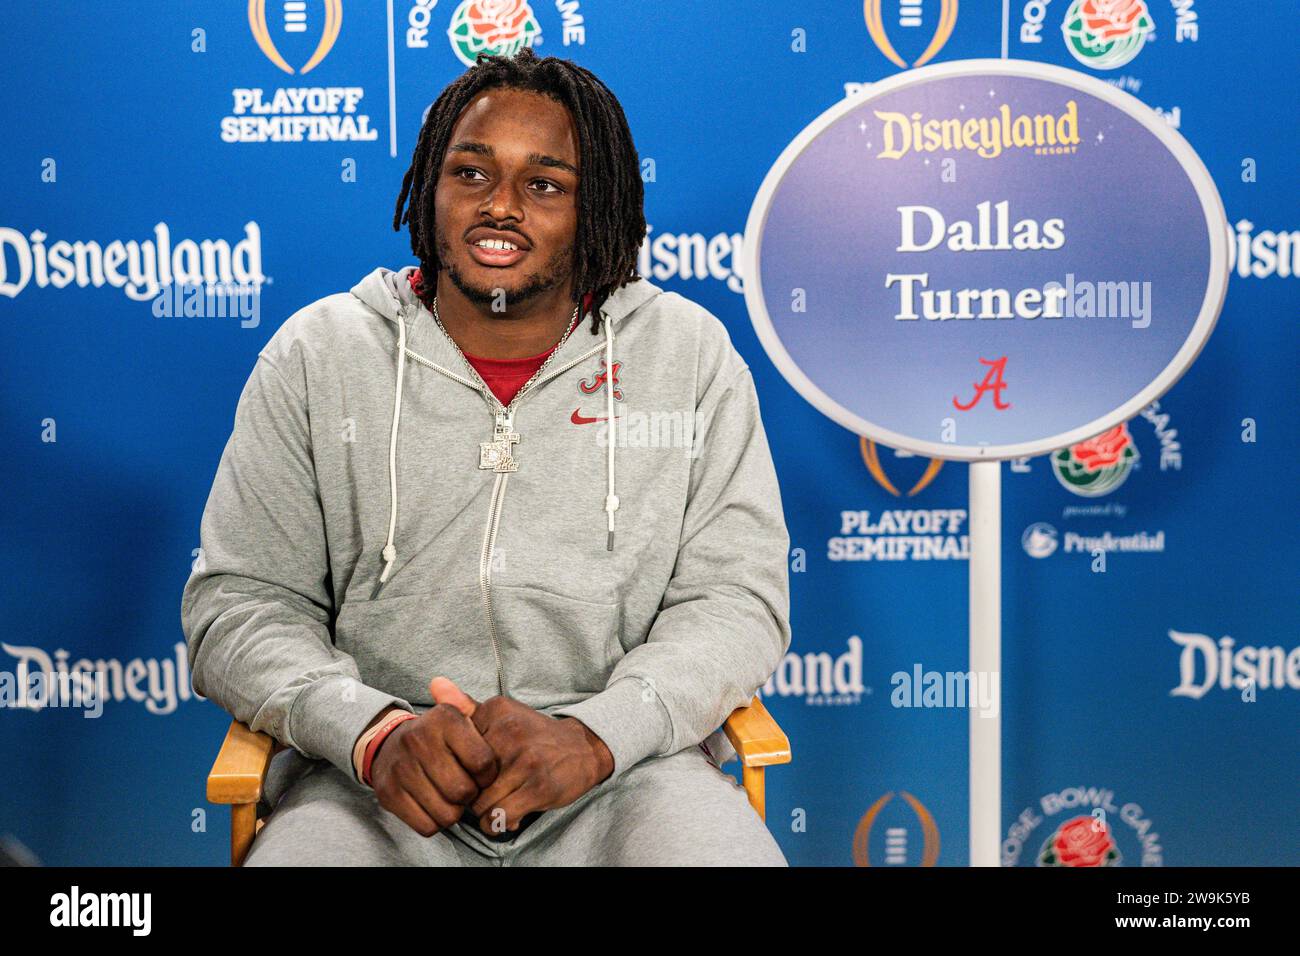 Alabama Crimson Tide linebacker Dallas Turner during the Rose Bowl welcome event for Alabama Crimson Tide and Michigan Wolverines, Wednesday, December Stock Photo